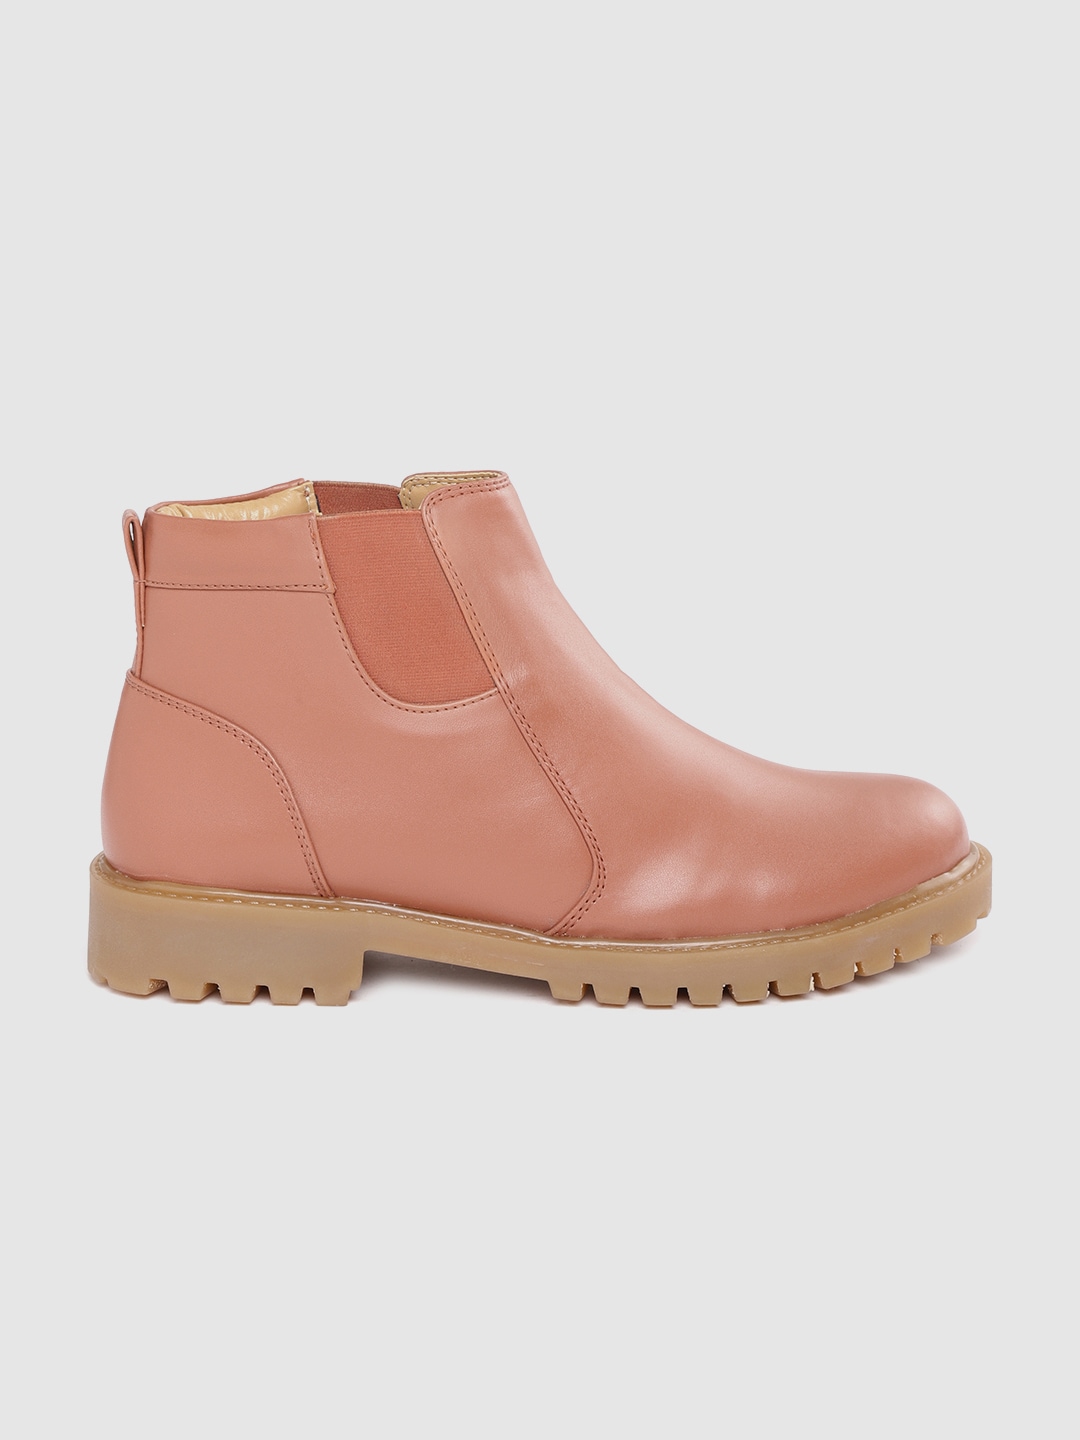 DressBerry Women Tan Solid Mid-Top Flat Boots Price in India